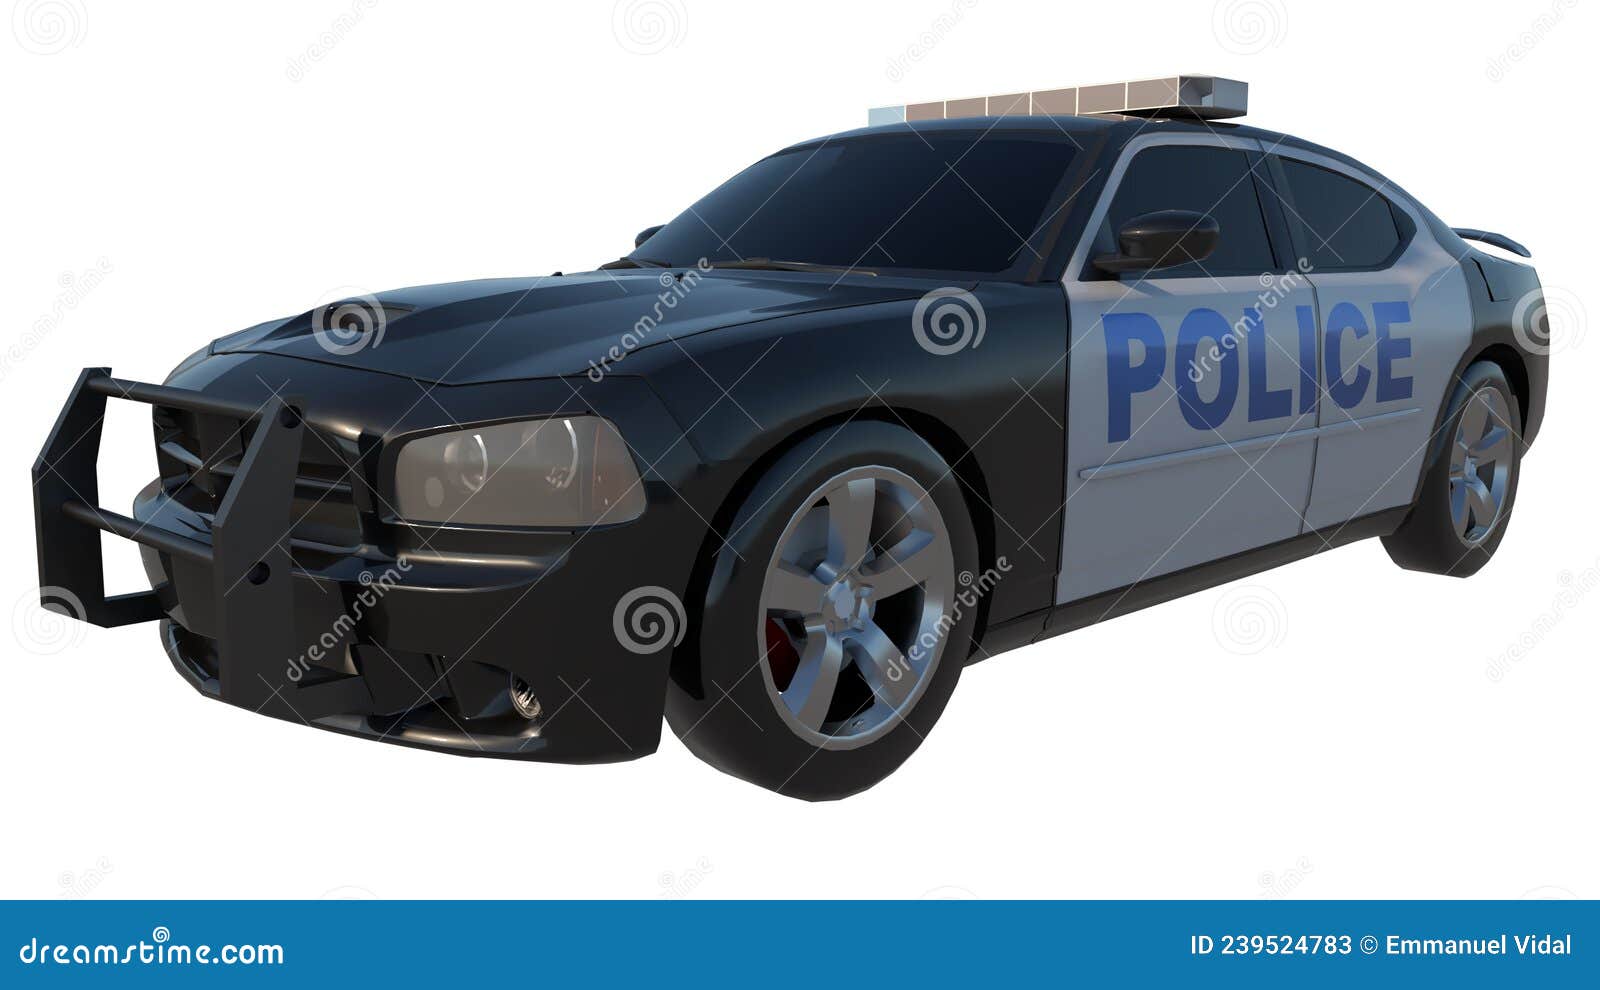 police patrol 2-perspective f view white background 3d rendering ilustracion 3d